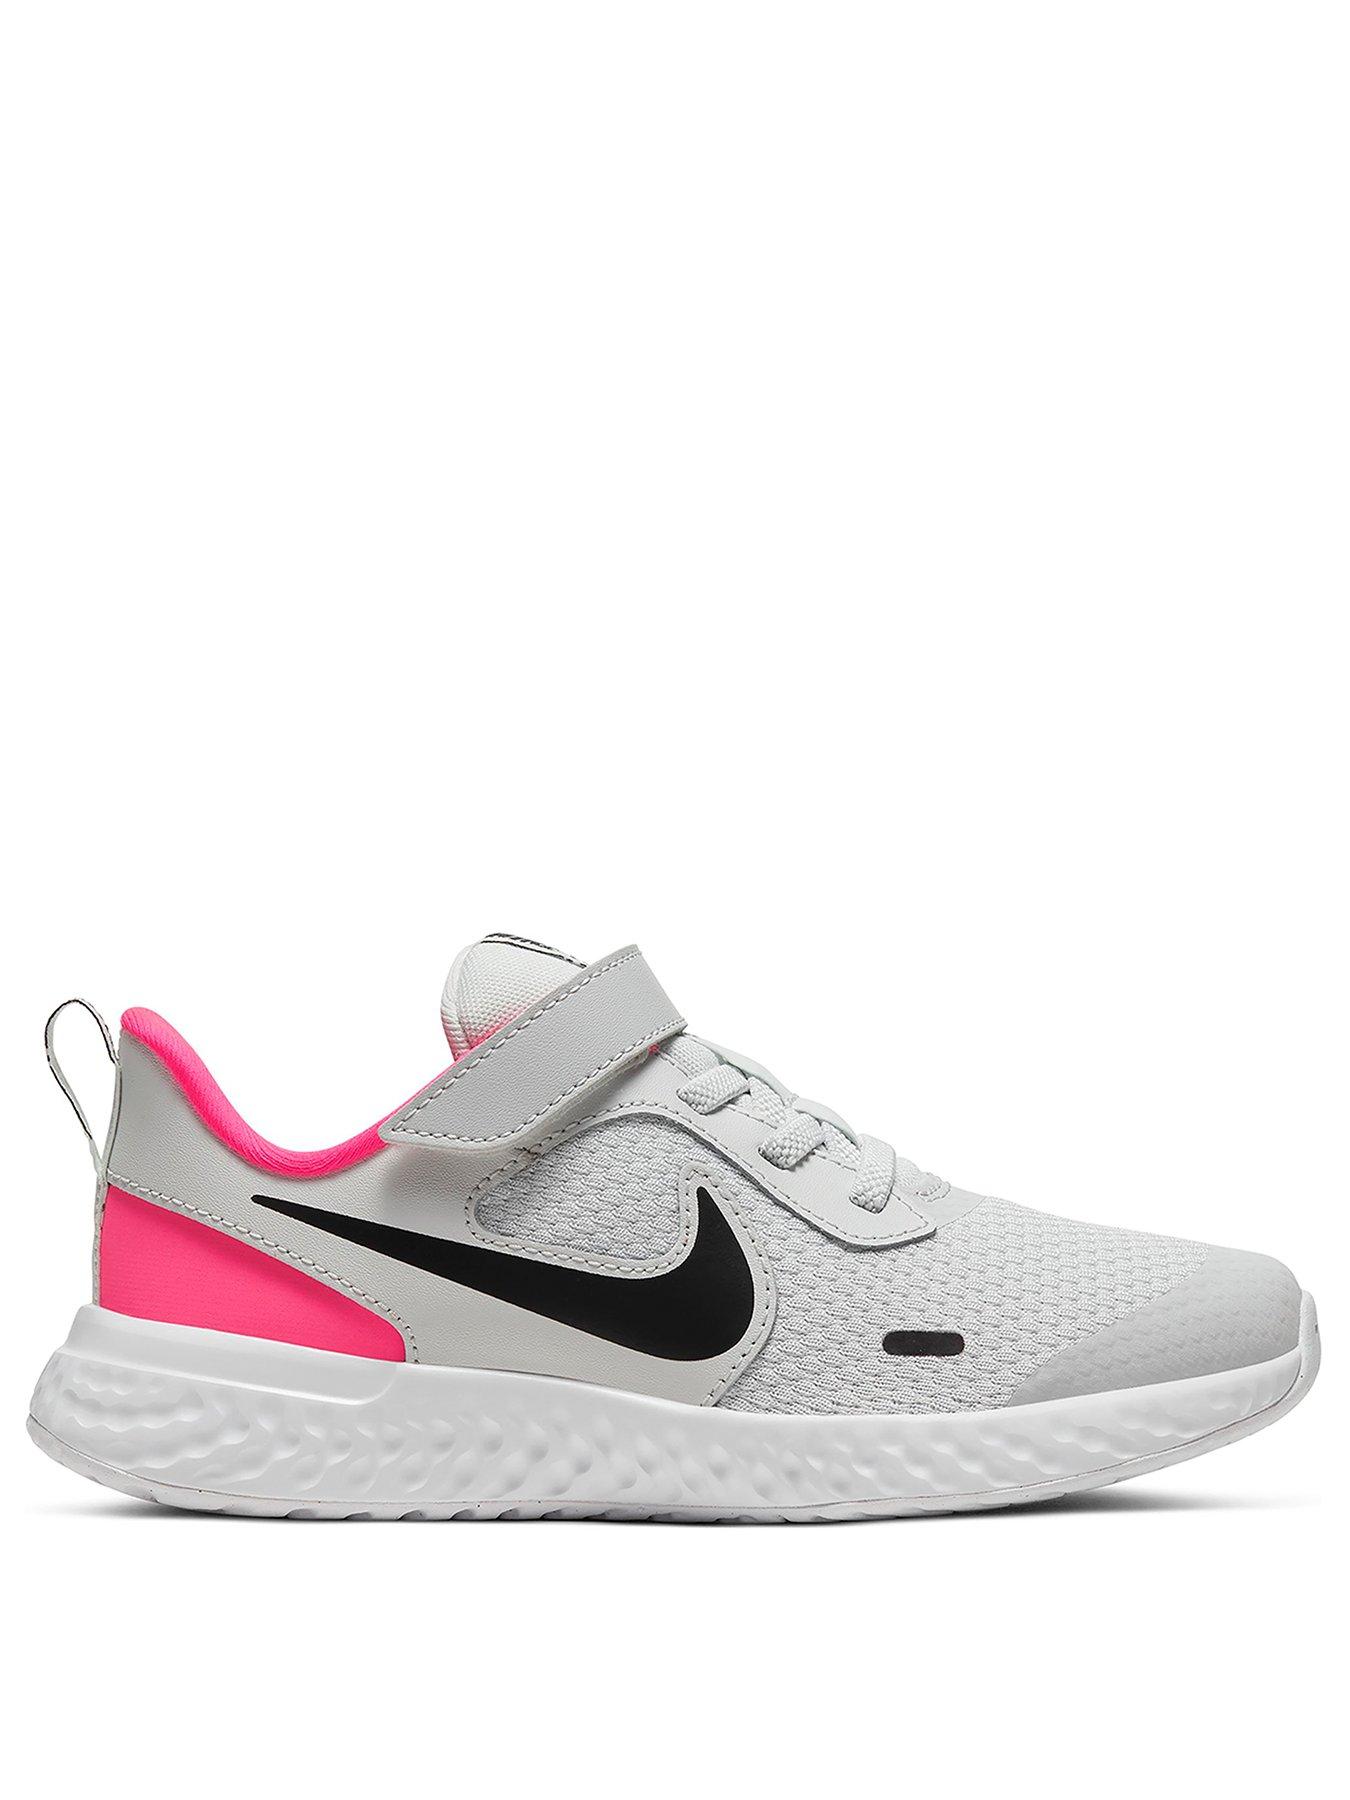 younger girls nike trainers